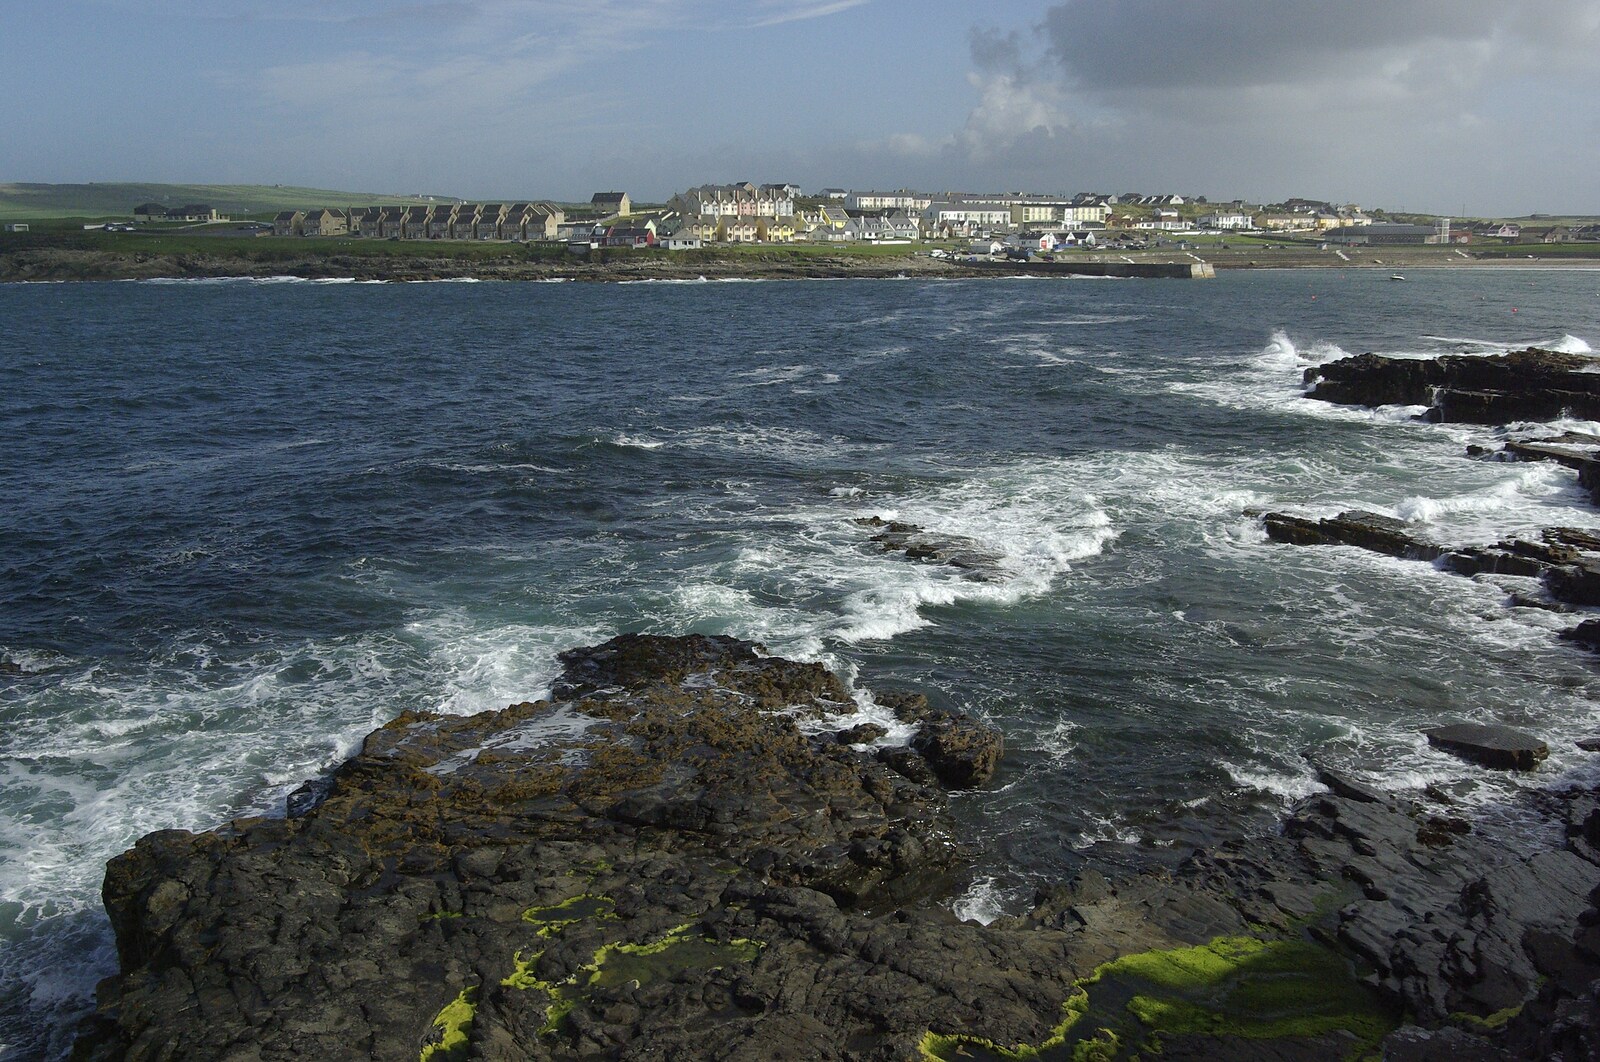 30th Birthday Party in Kilkee, County Clare, Ireland - 22nd September 2007: The town of Kilkee, from the rocks